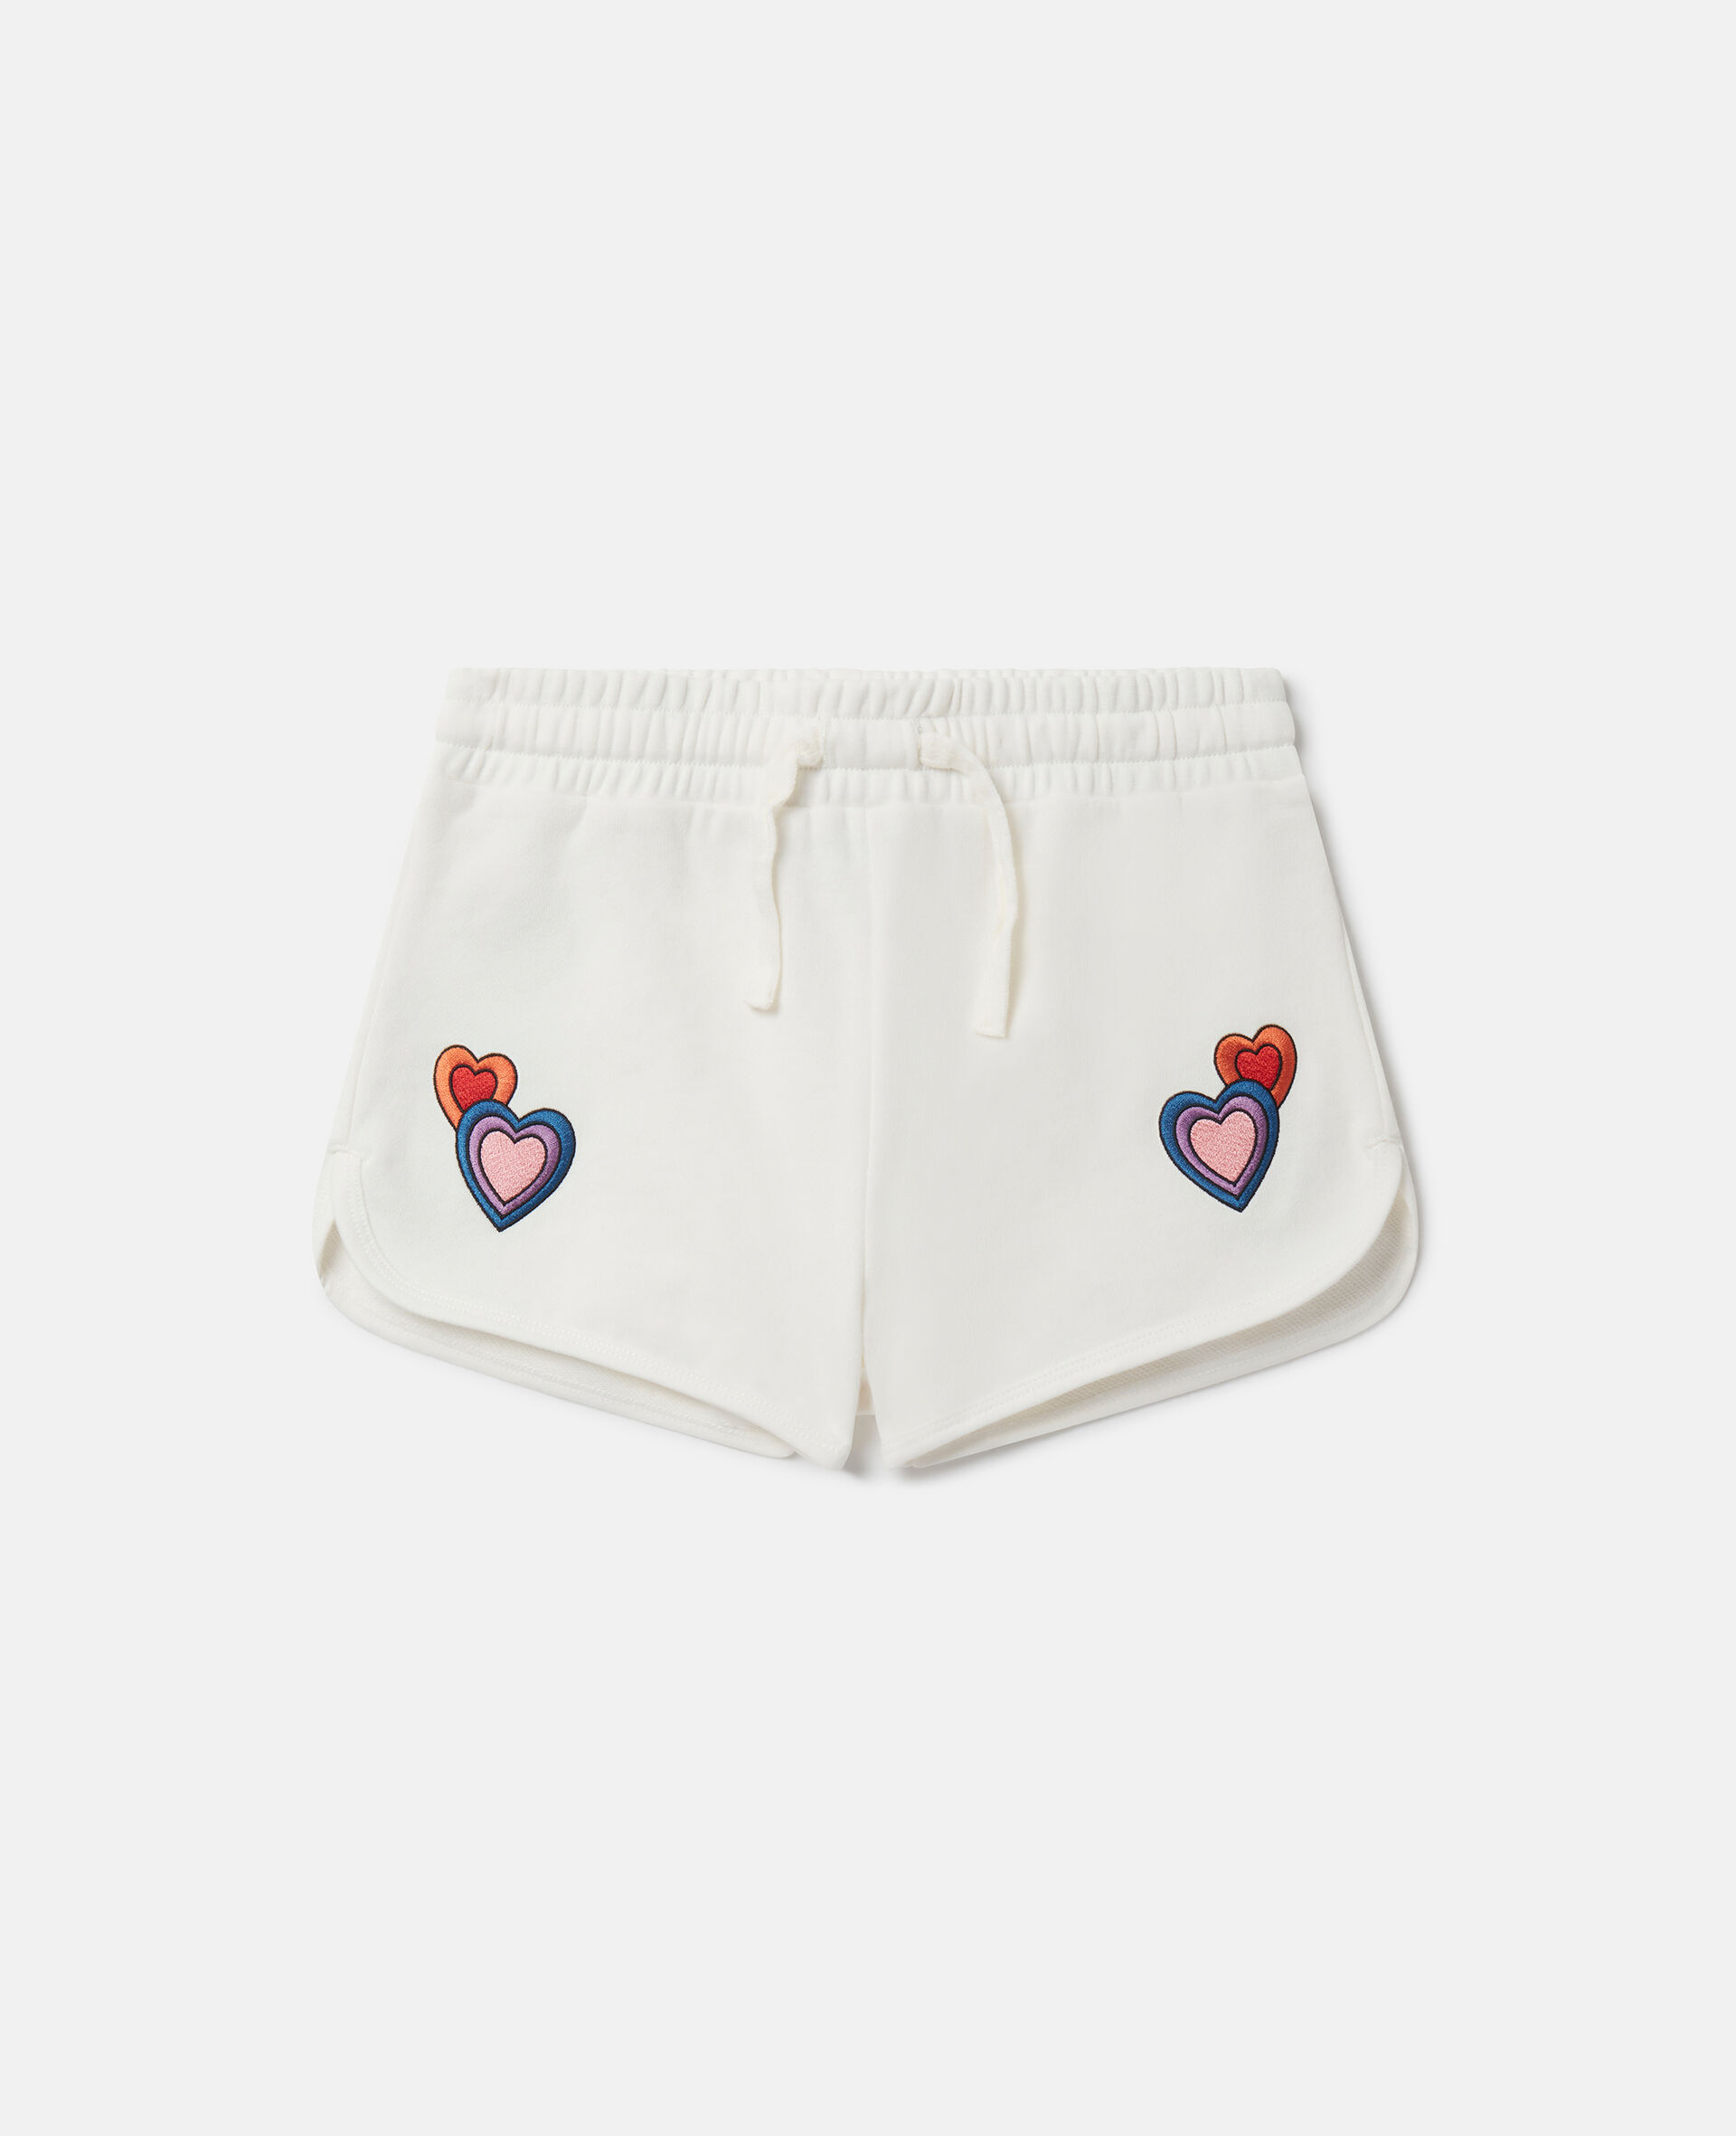 I Love You Embroidered Shorts-Multicoloured-large image number 0